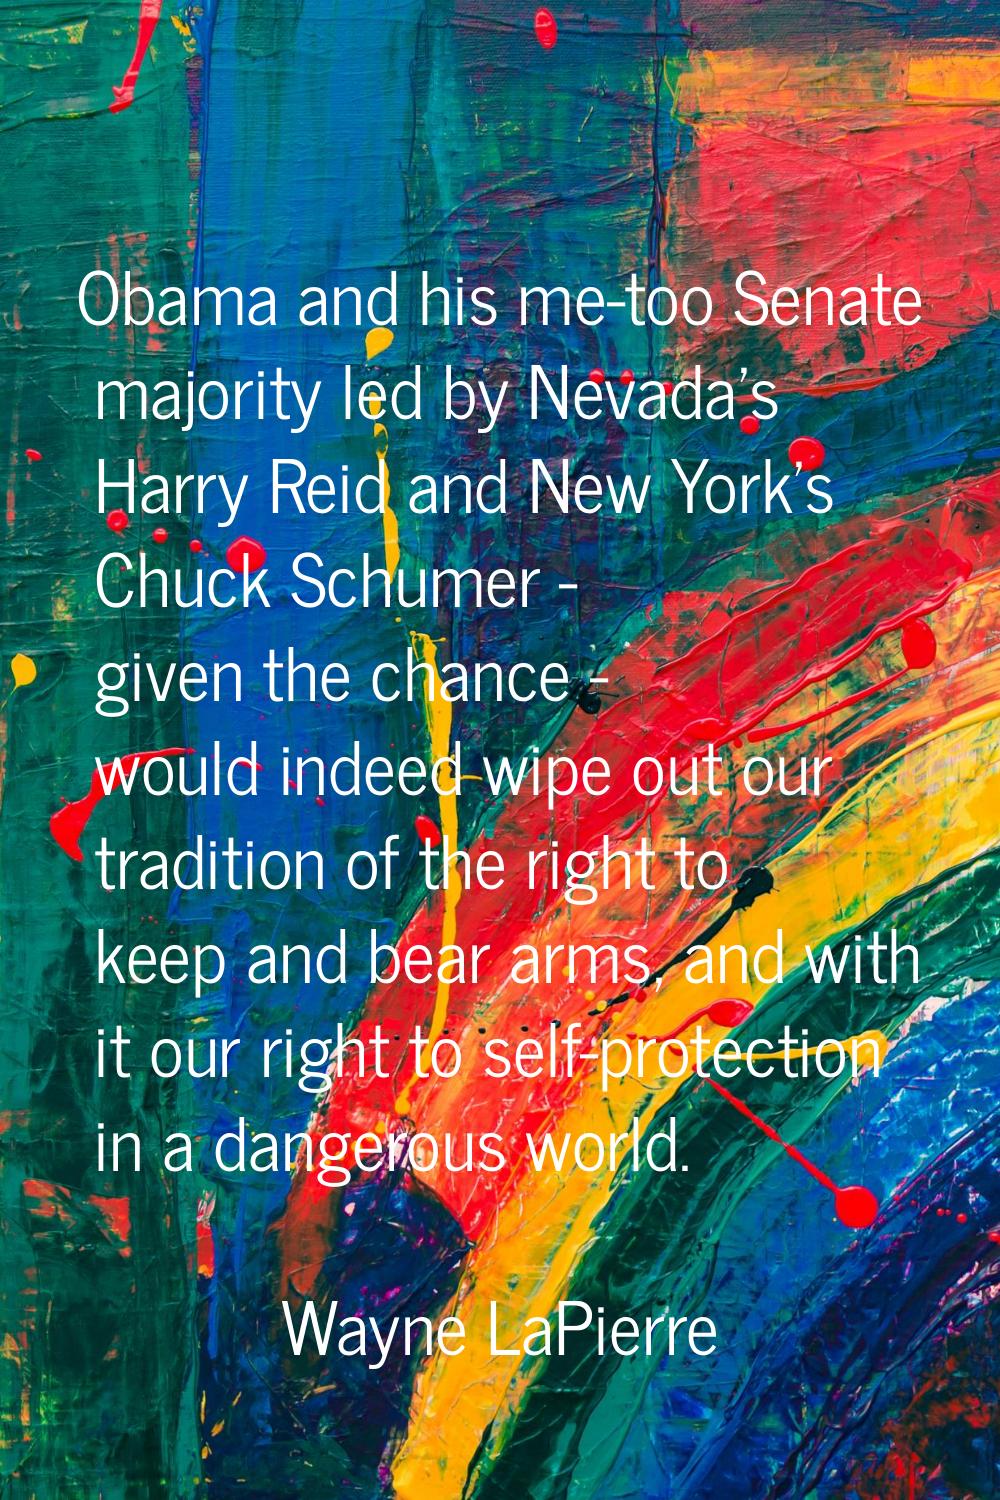 Obama and his me-too Senate majority led by Nevada's Harry Reid and New York's Chuck Schumer - give